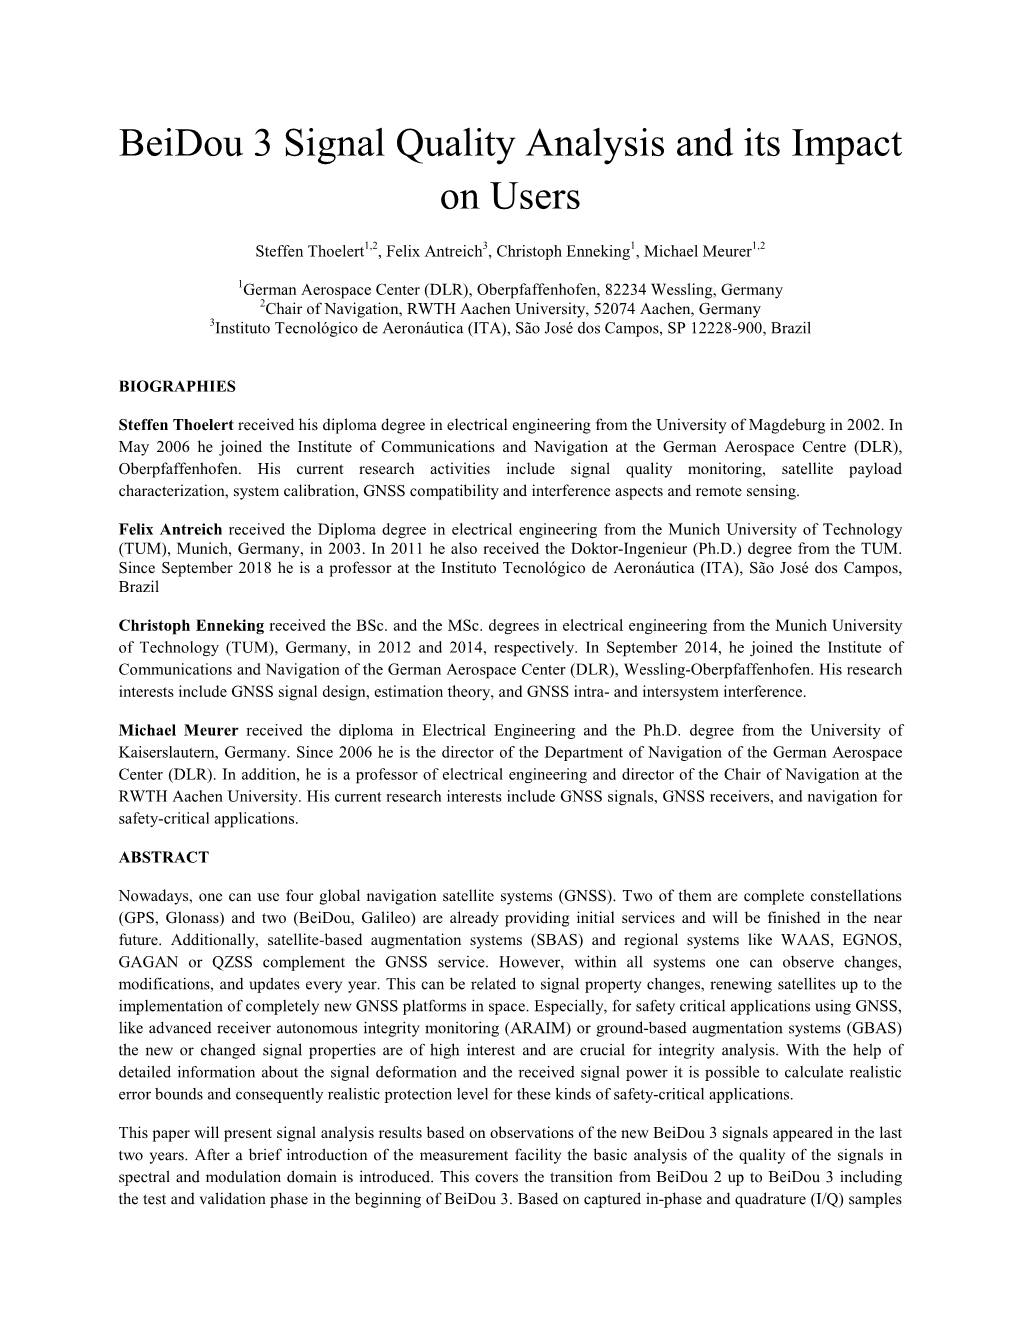 Beidou 3 Signal Quality Analysis and Its Impact on Users